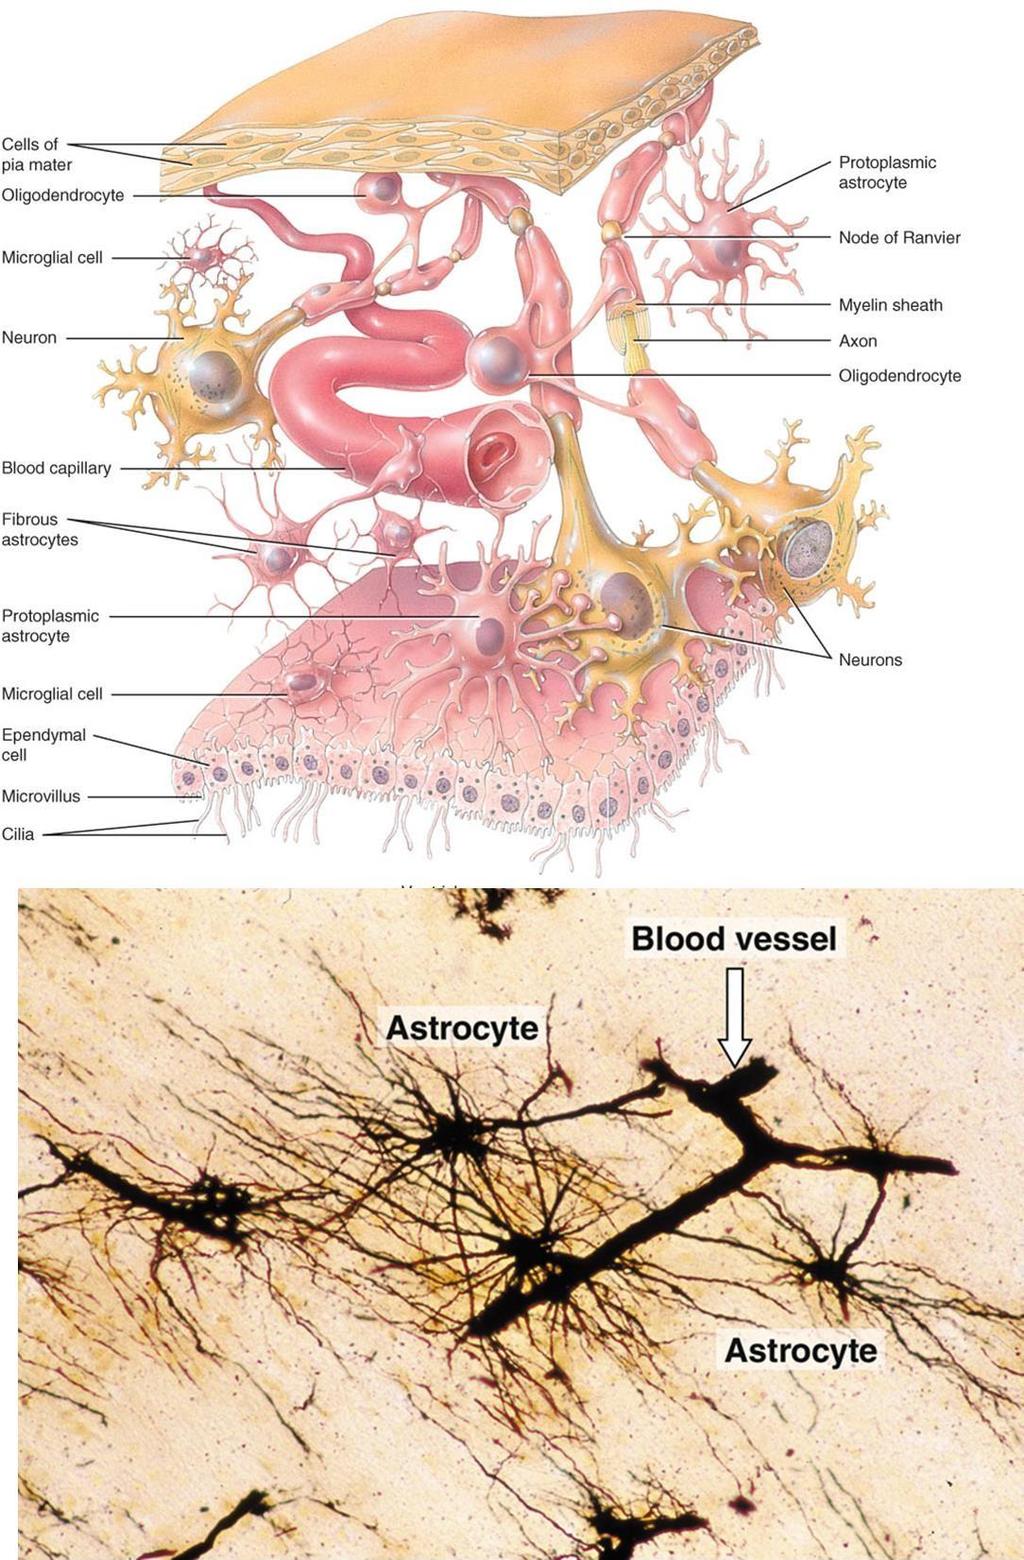 Astrocytes Star-shaped cells Form blood-brain barrier by covering blood capillaries Metabolize